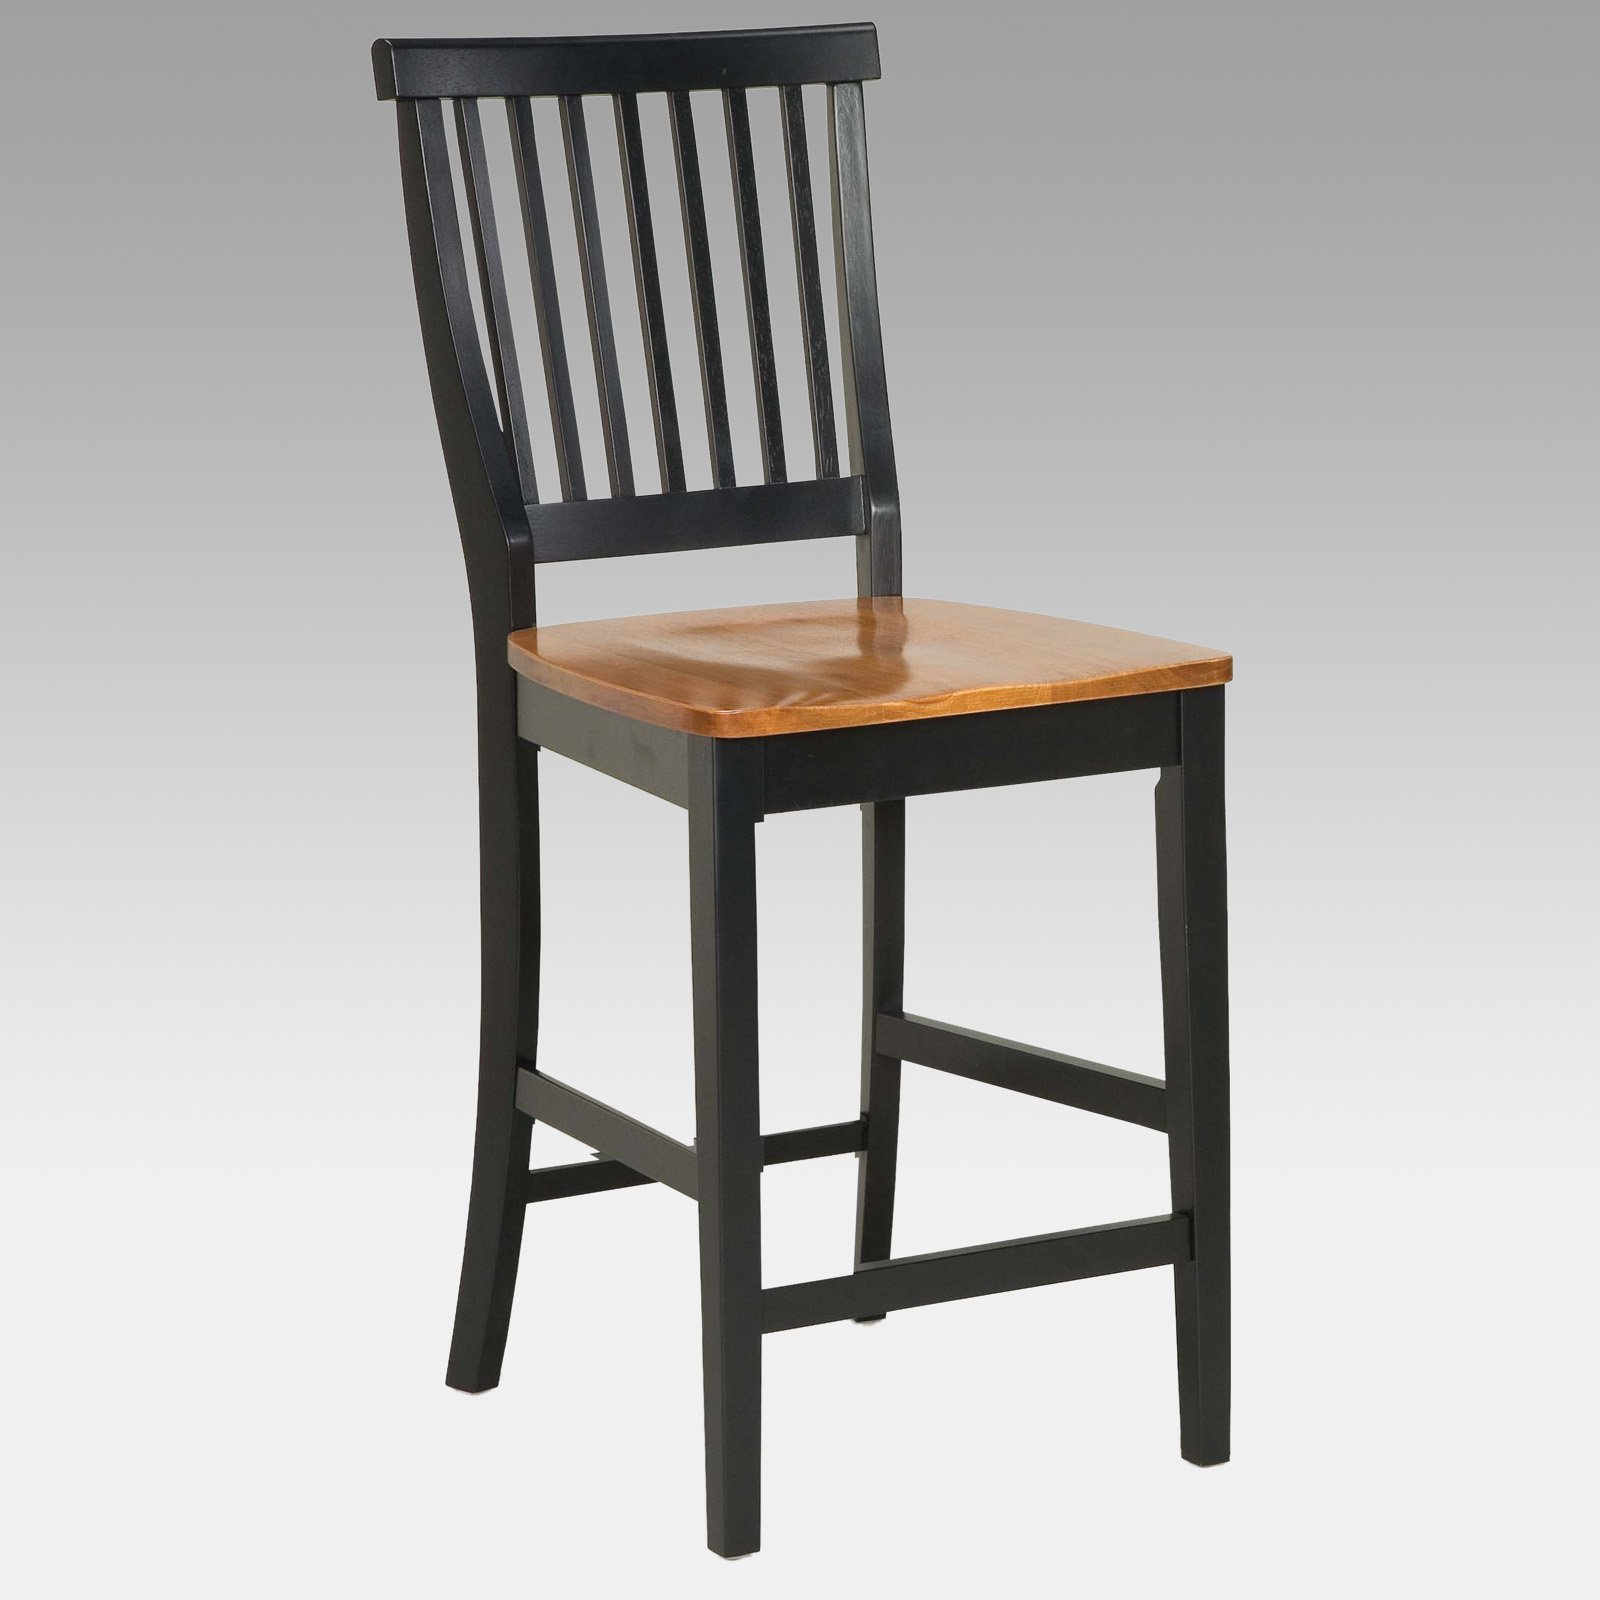 Home Styles Black Counter Stool with Oak Finished Seat - image 1 of 4